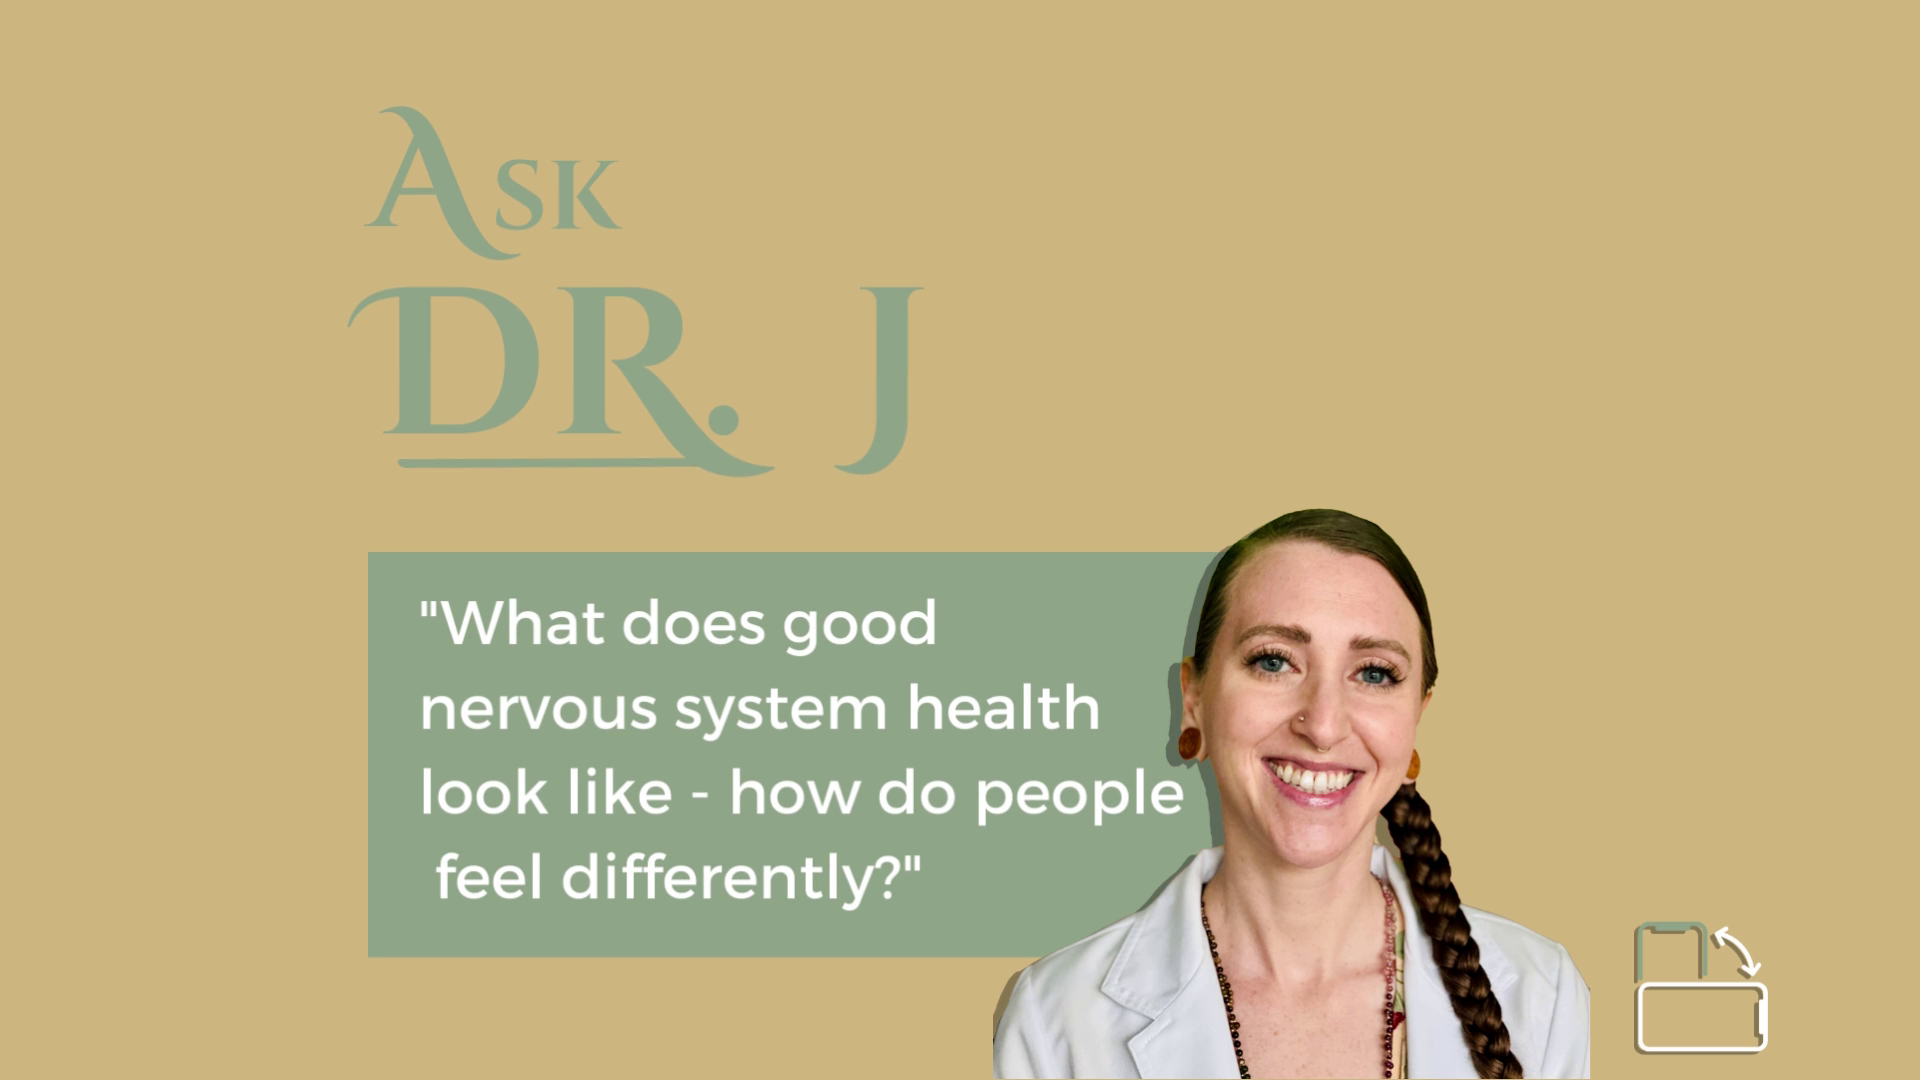 Load video: What does good nervous system health look like - how do people feel differently